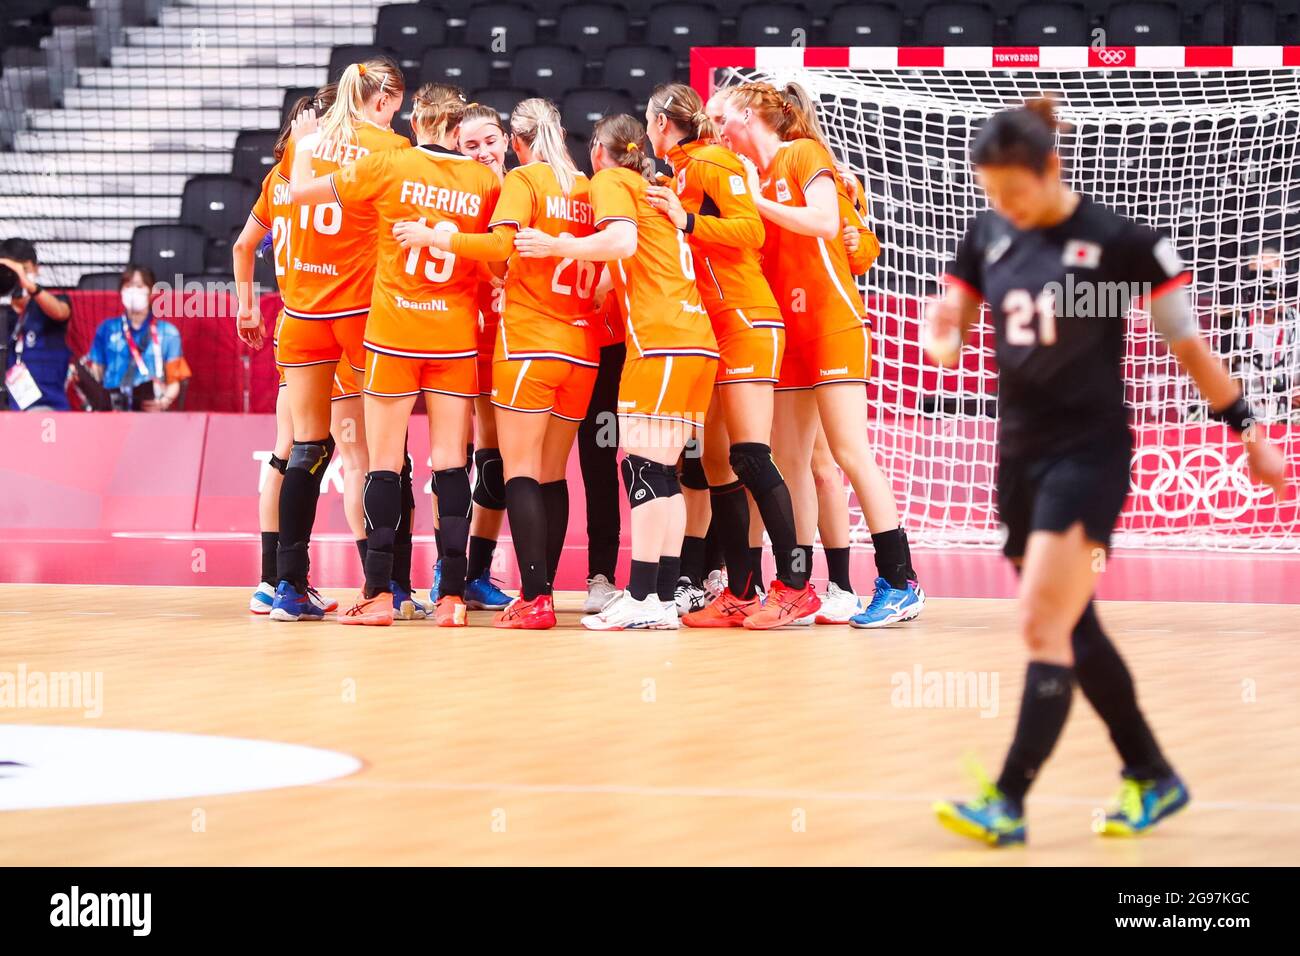 TOKYO, JAPAN - JULY 25: Kelly Dulfer of the Netherlands, Merel Freriks of the Netherlands, Angela Malestein of the Netherlands, Laura van der Heijden of the Netherlands, Lois Abbingh of the Netherlands and Dione Househeer of the Netherlands celebrate their teams win against Japan during the Tokyo 2020 Olympic Womens Handball Tournament match between Netherlands and Japan at Yoyogi National Stadium on July 25, 2021 in Tokyo, Japan (Photo by Orange Pictures) NOCNSF House of Sports Stock Photo